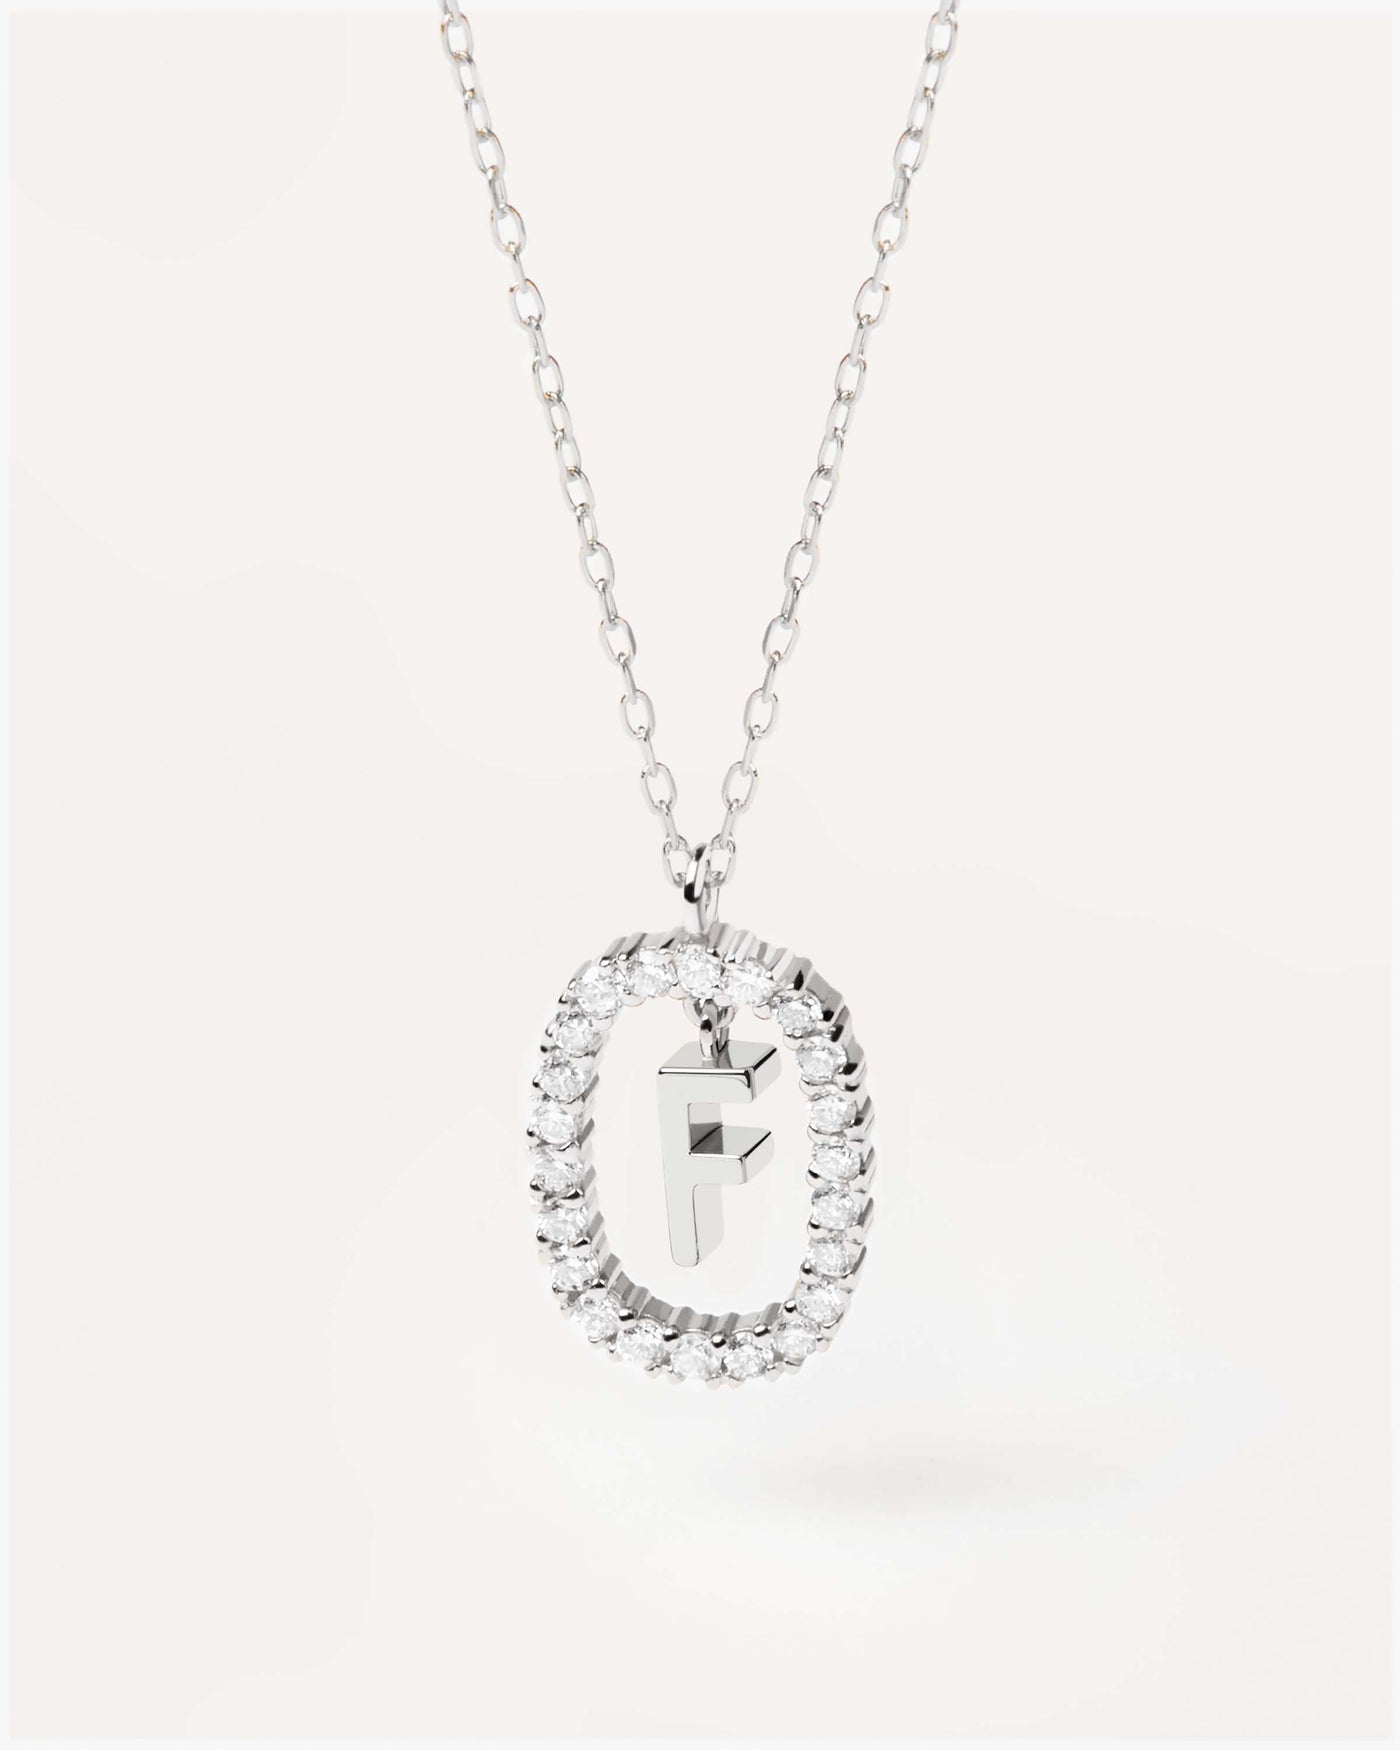 2023 Selection | Diamonds and White Gold Letter F Necklace. Initial F necklace in solid white gold, circled by 0.33 carats lab-grown diamonds. Get the latest arrival from PDPAOLA. Place your order safely and get this Best Seller. Free Shipping.